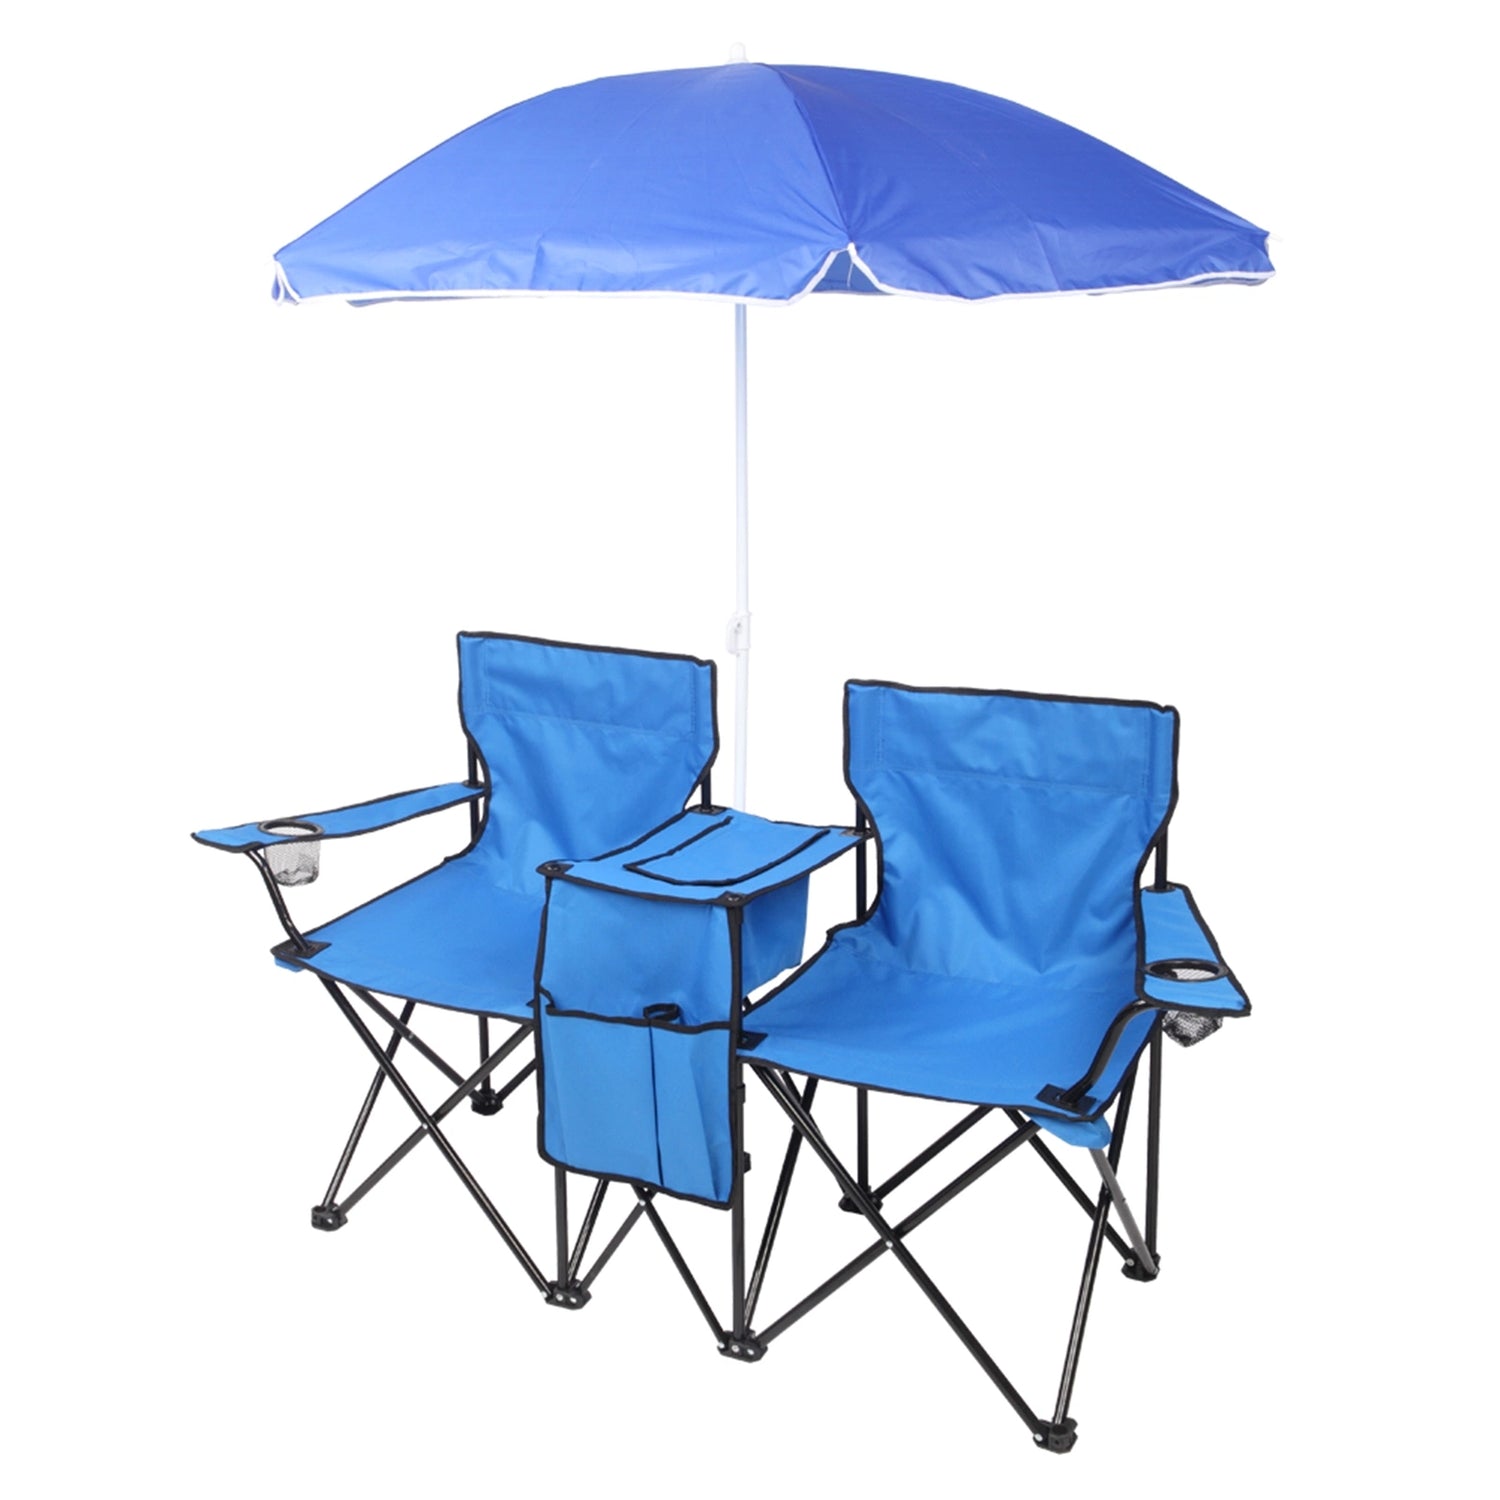 Portable Beach Chairs with Umbrella